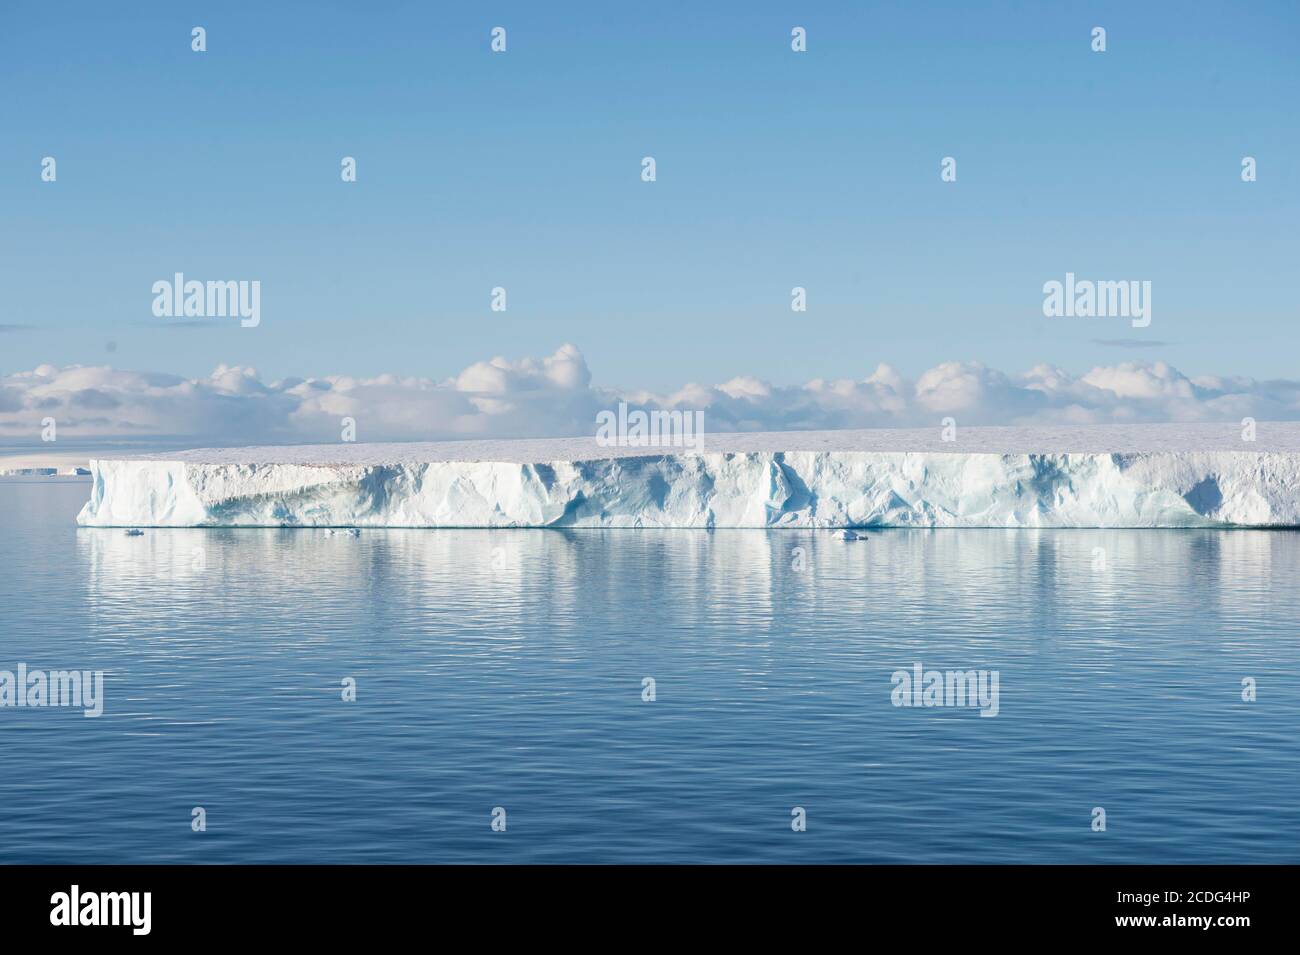 An flat topped icebergs in the weddell sea calved from a glacier Stock Photo